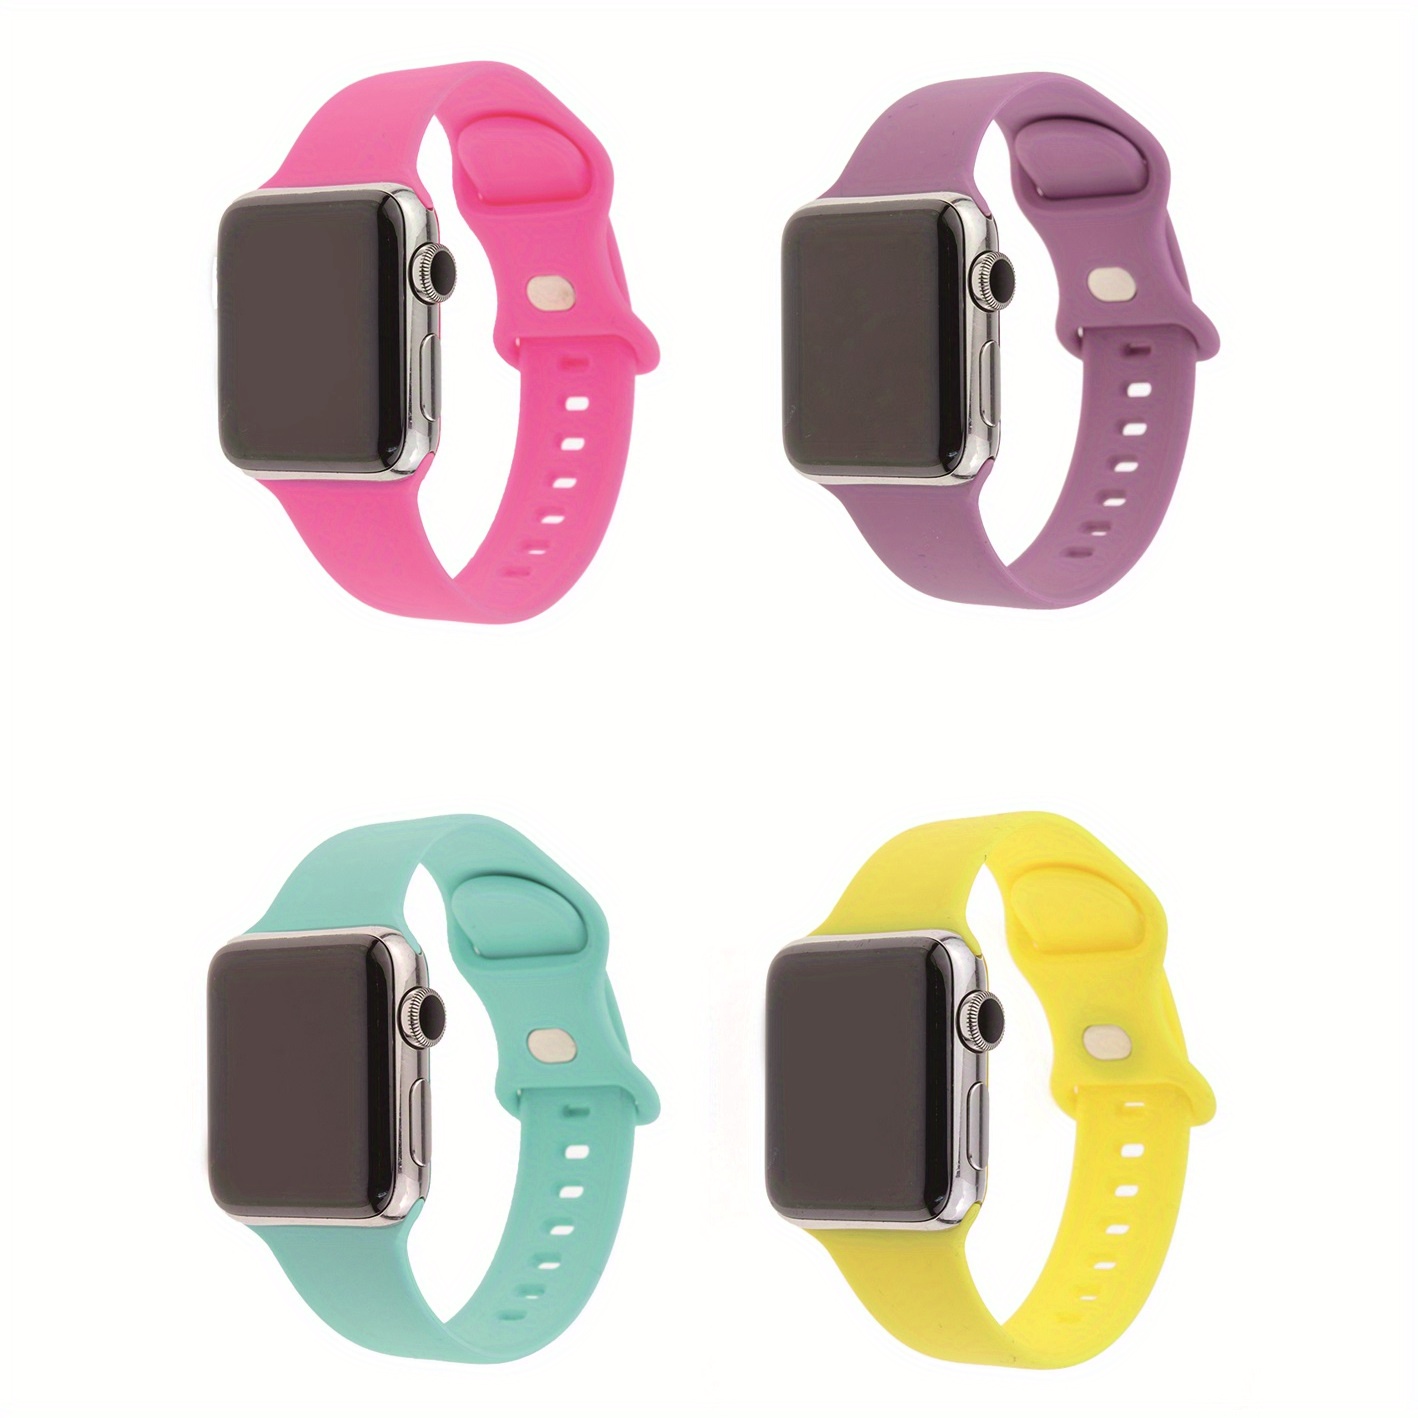 Fashionable Silicone Four-color Set Apple Watch Strap Is Suitable For Apple Watch2/3/4/5/6 Generations Of Smart Watches